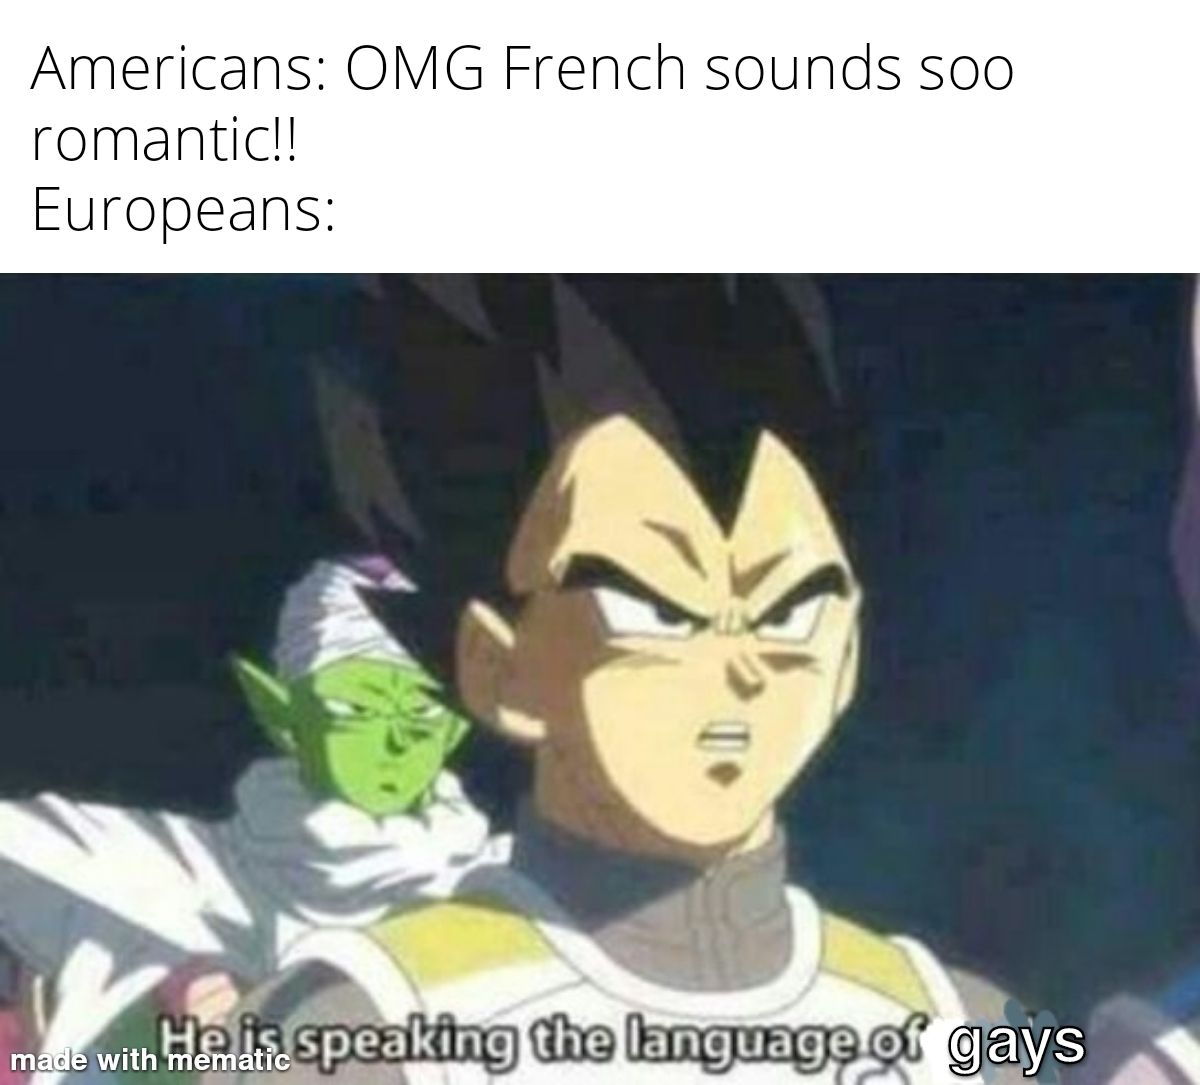 All europeans can relate